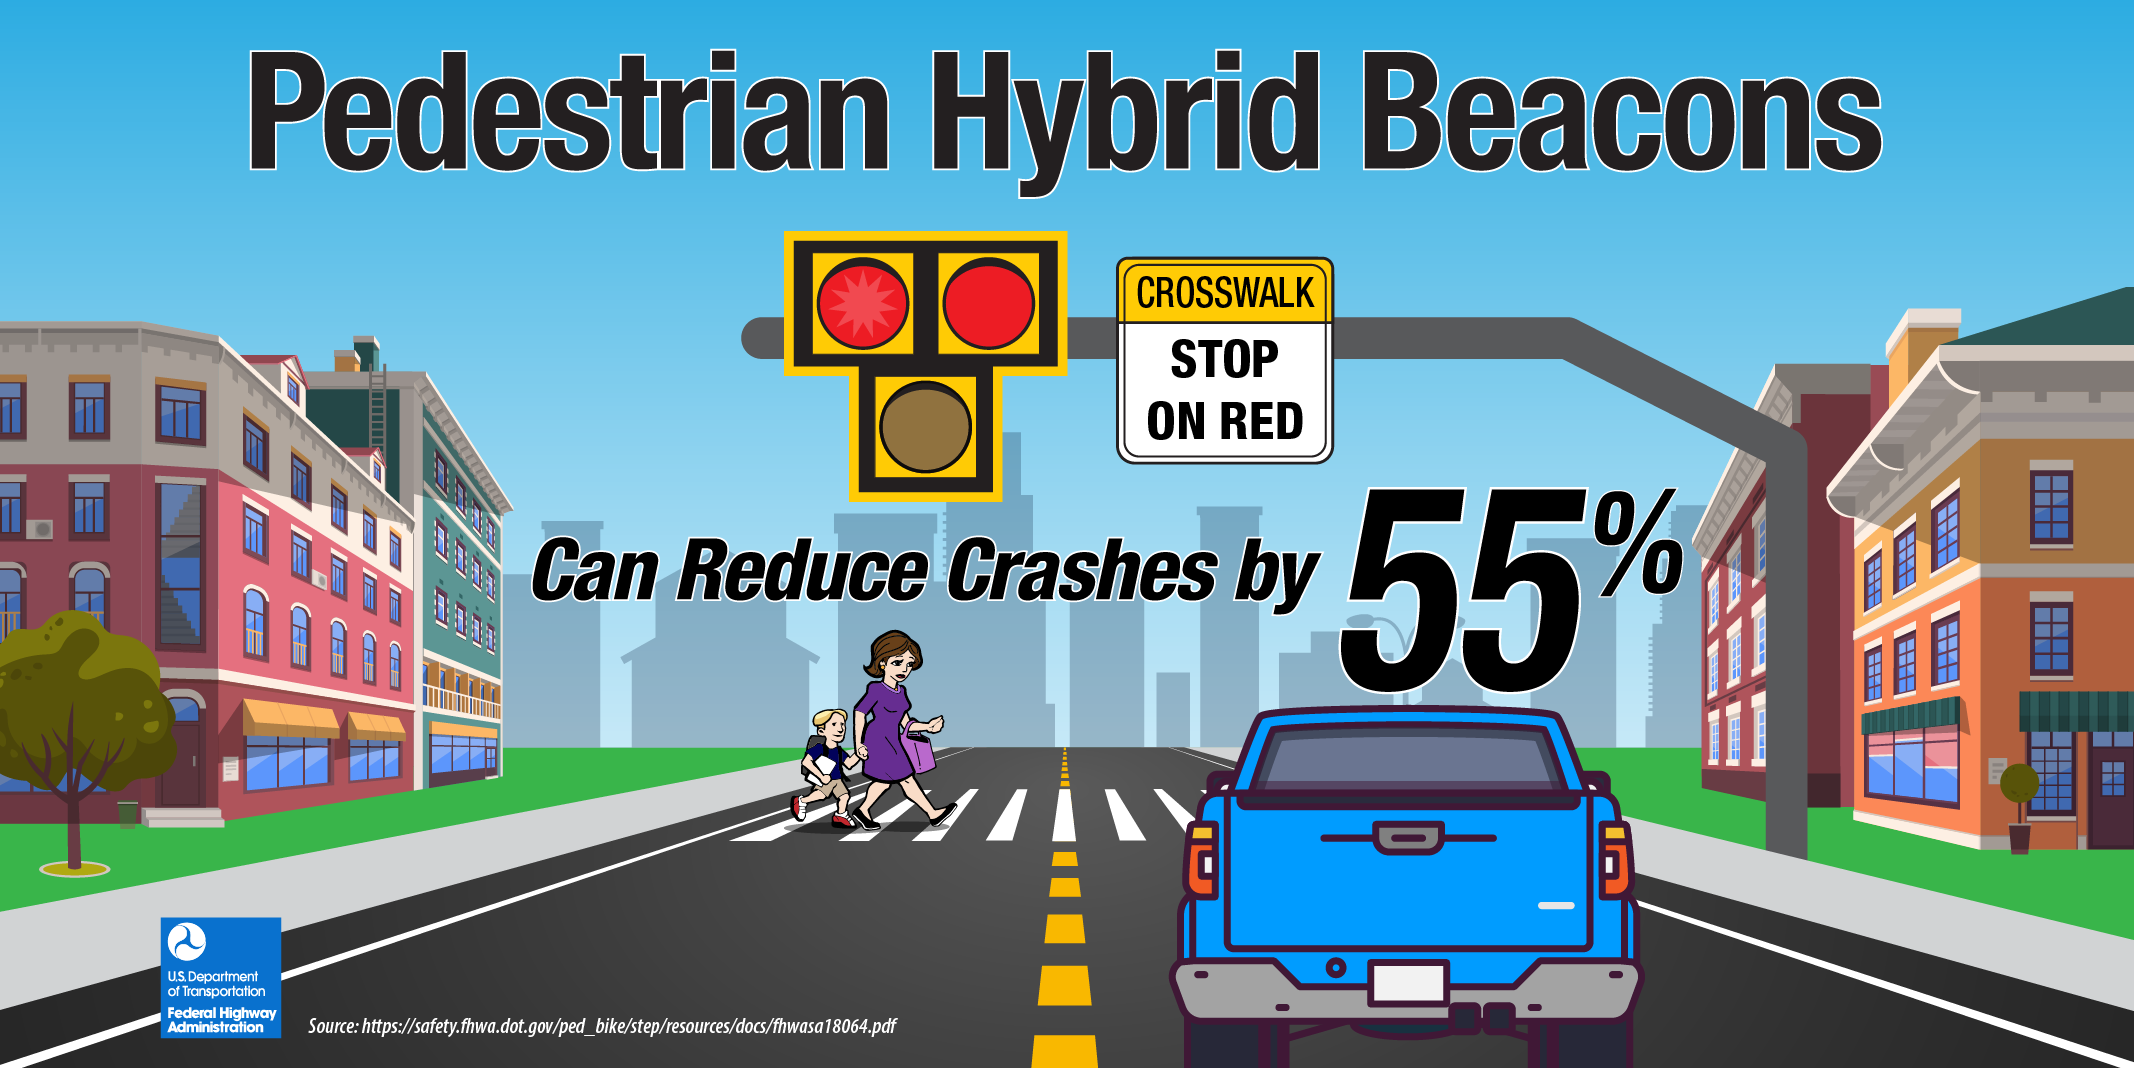 Infographic: Pedestrian Hybrid Beacons Can Reduce Crashes by 55%